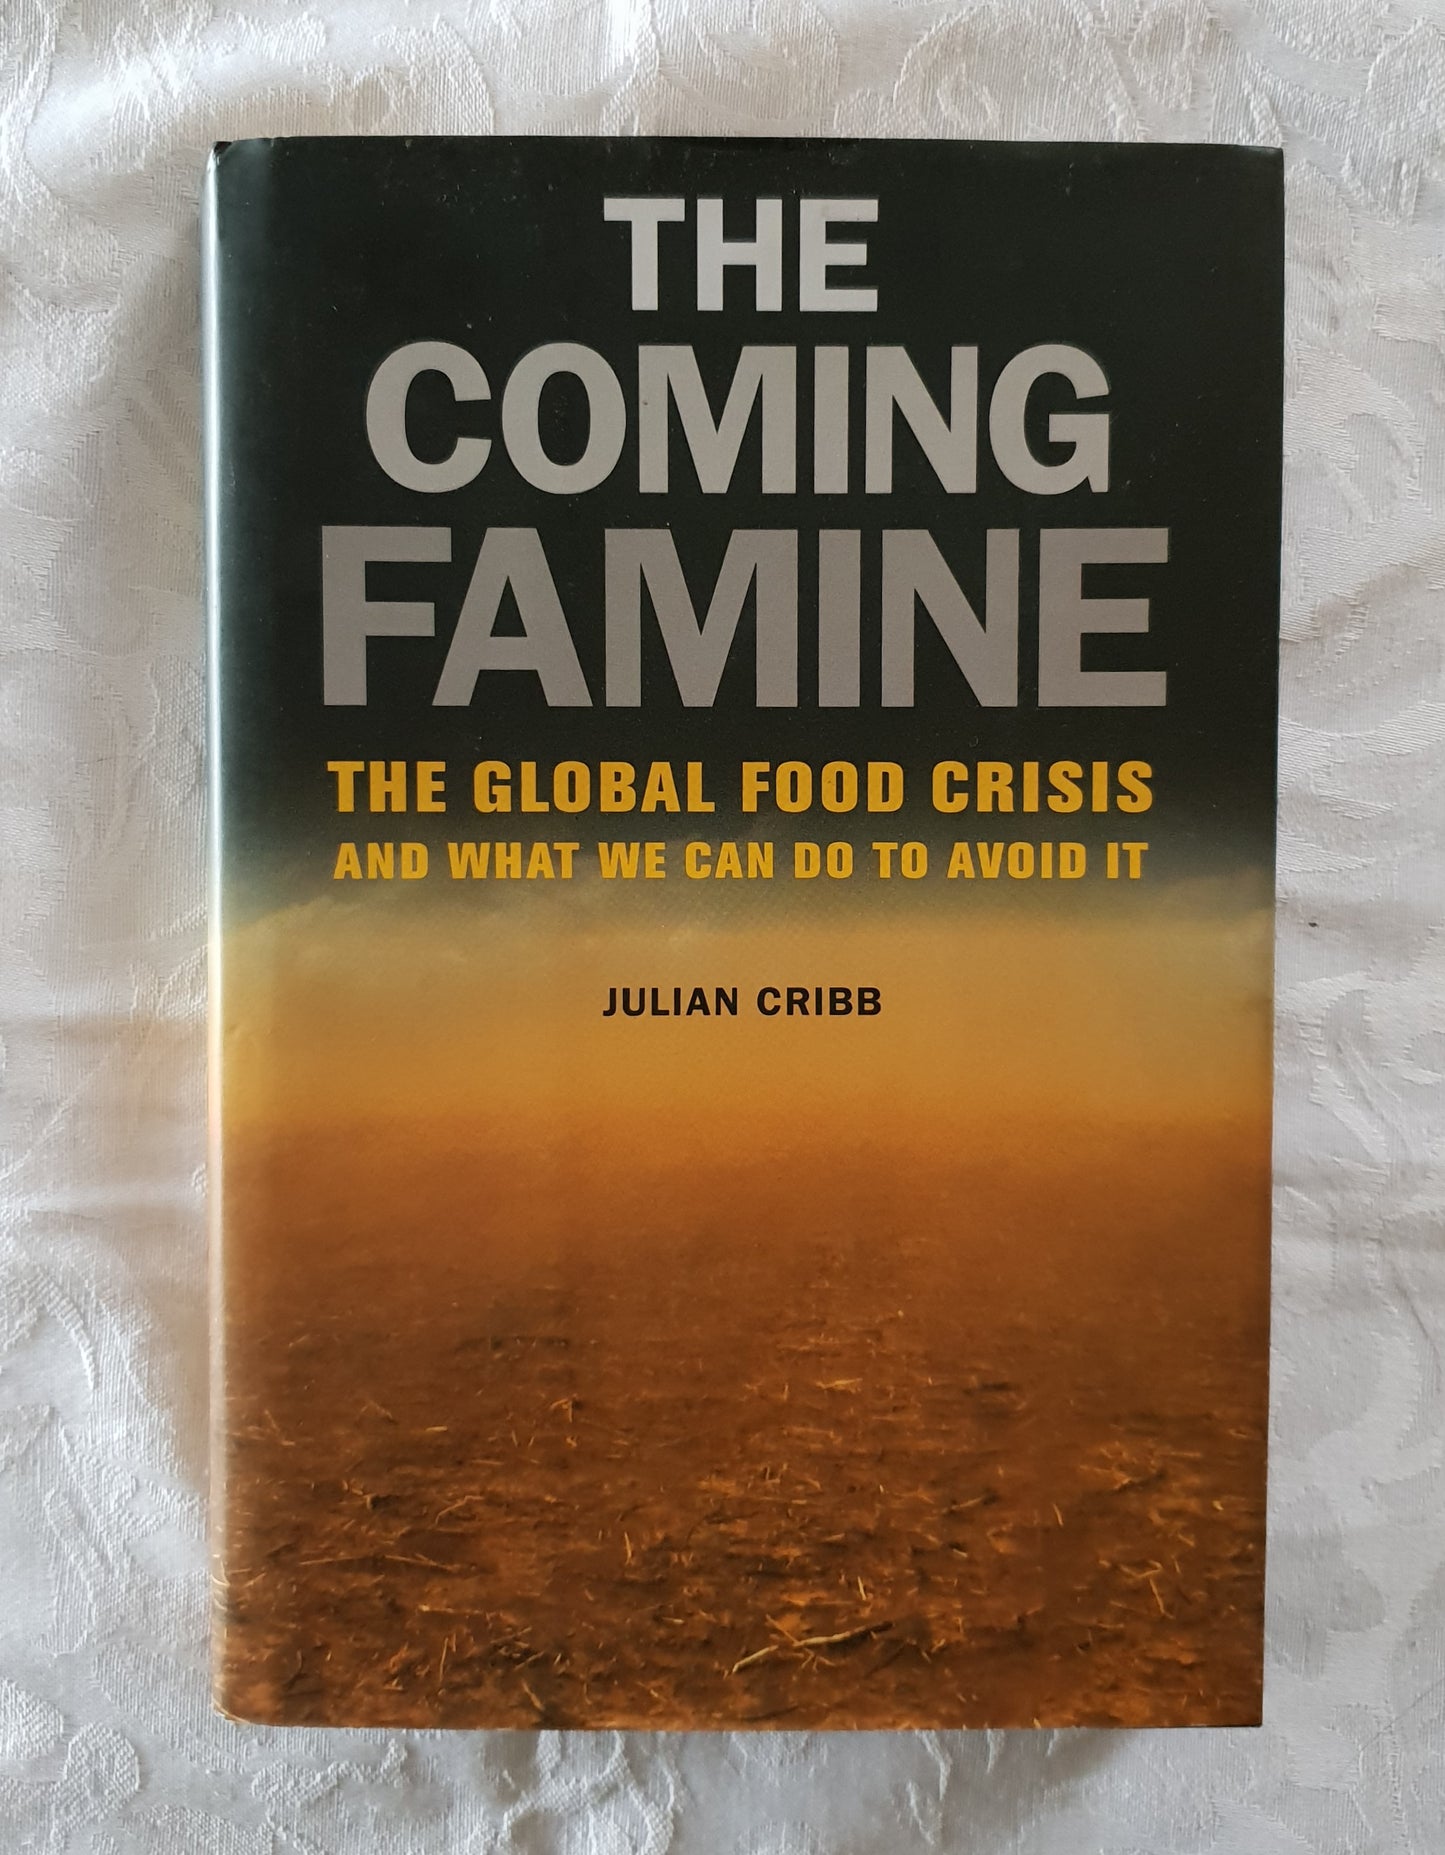 The Coming Famine by Julian Cribb